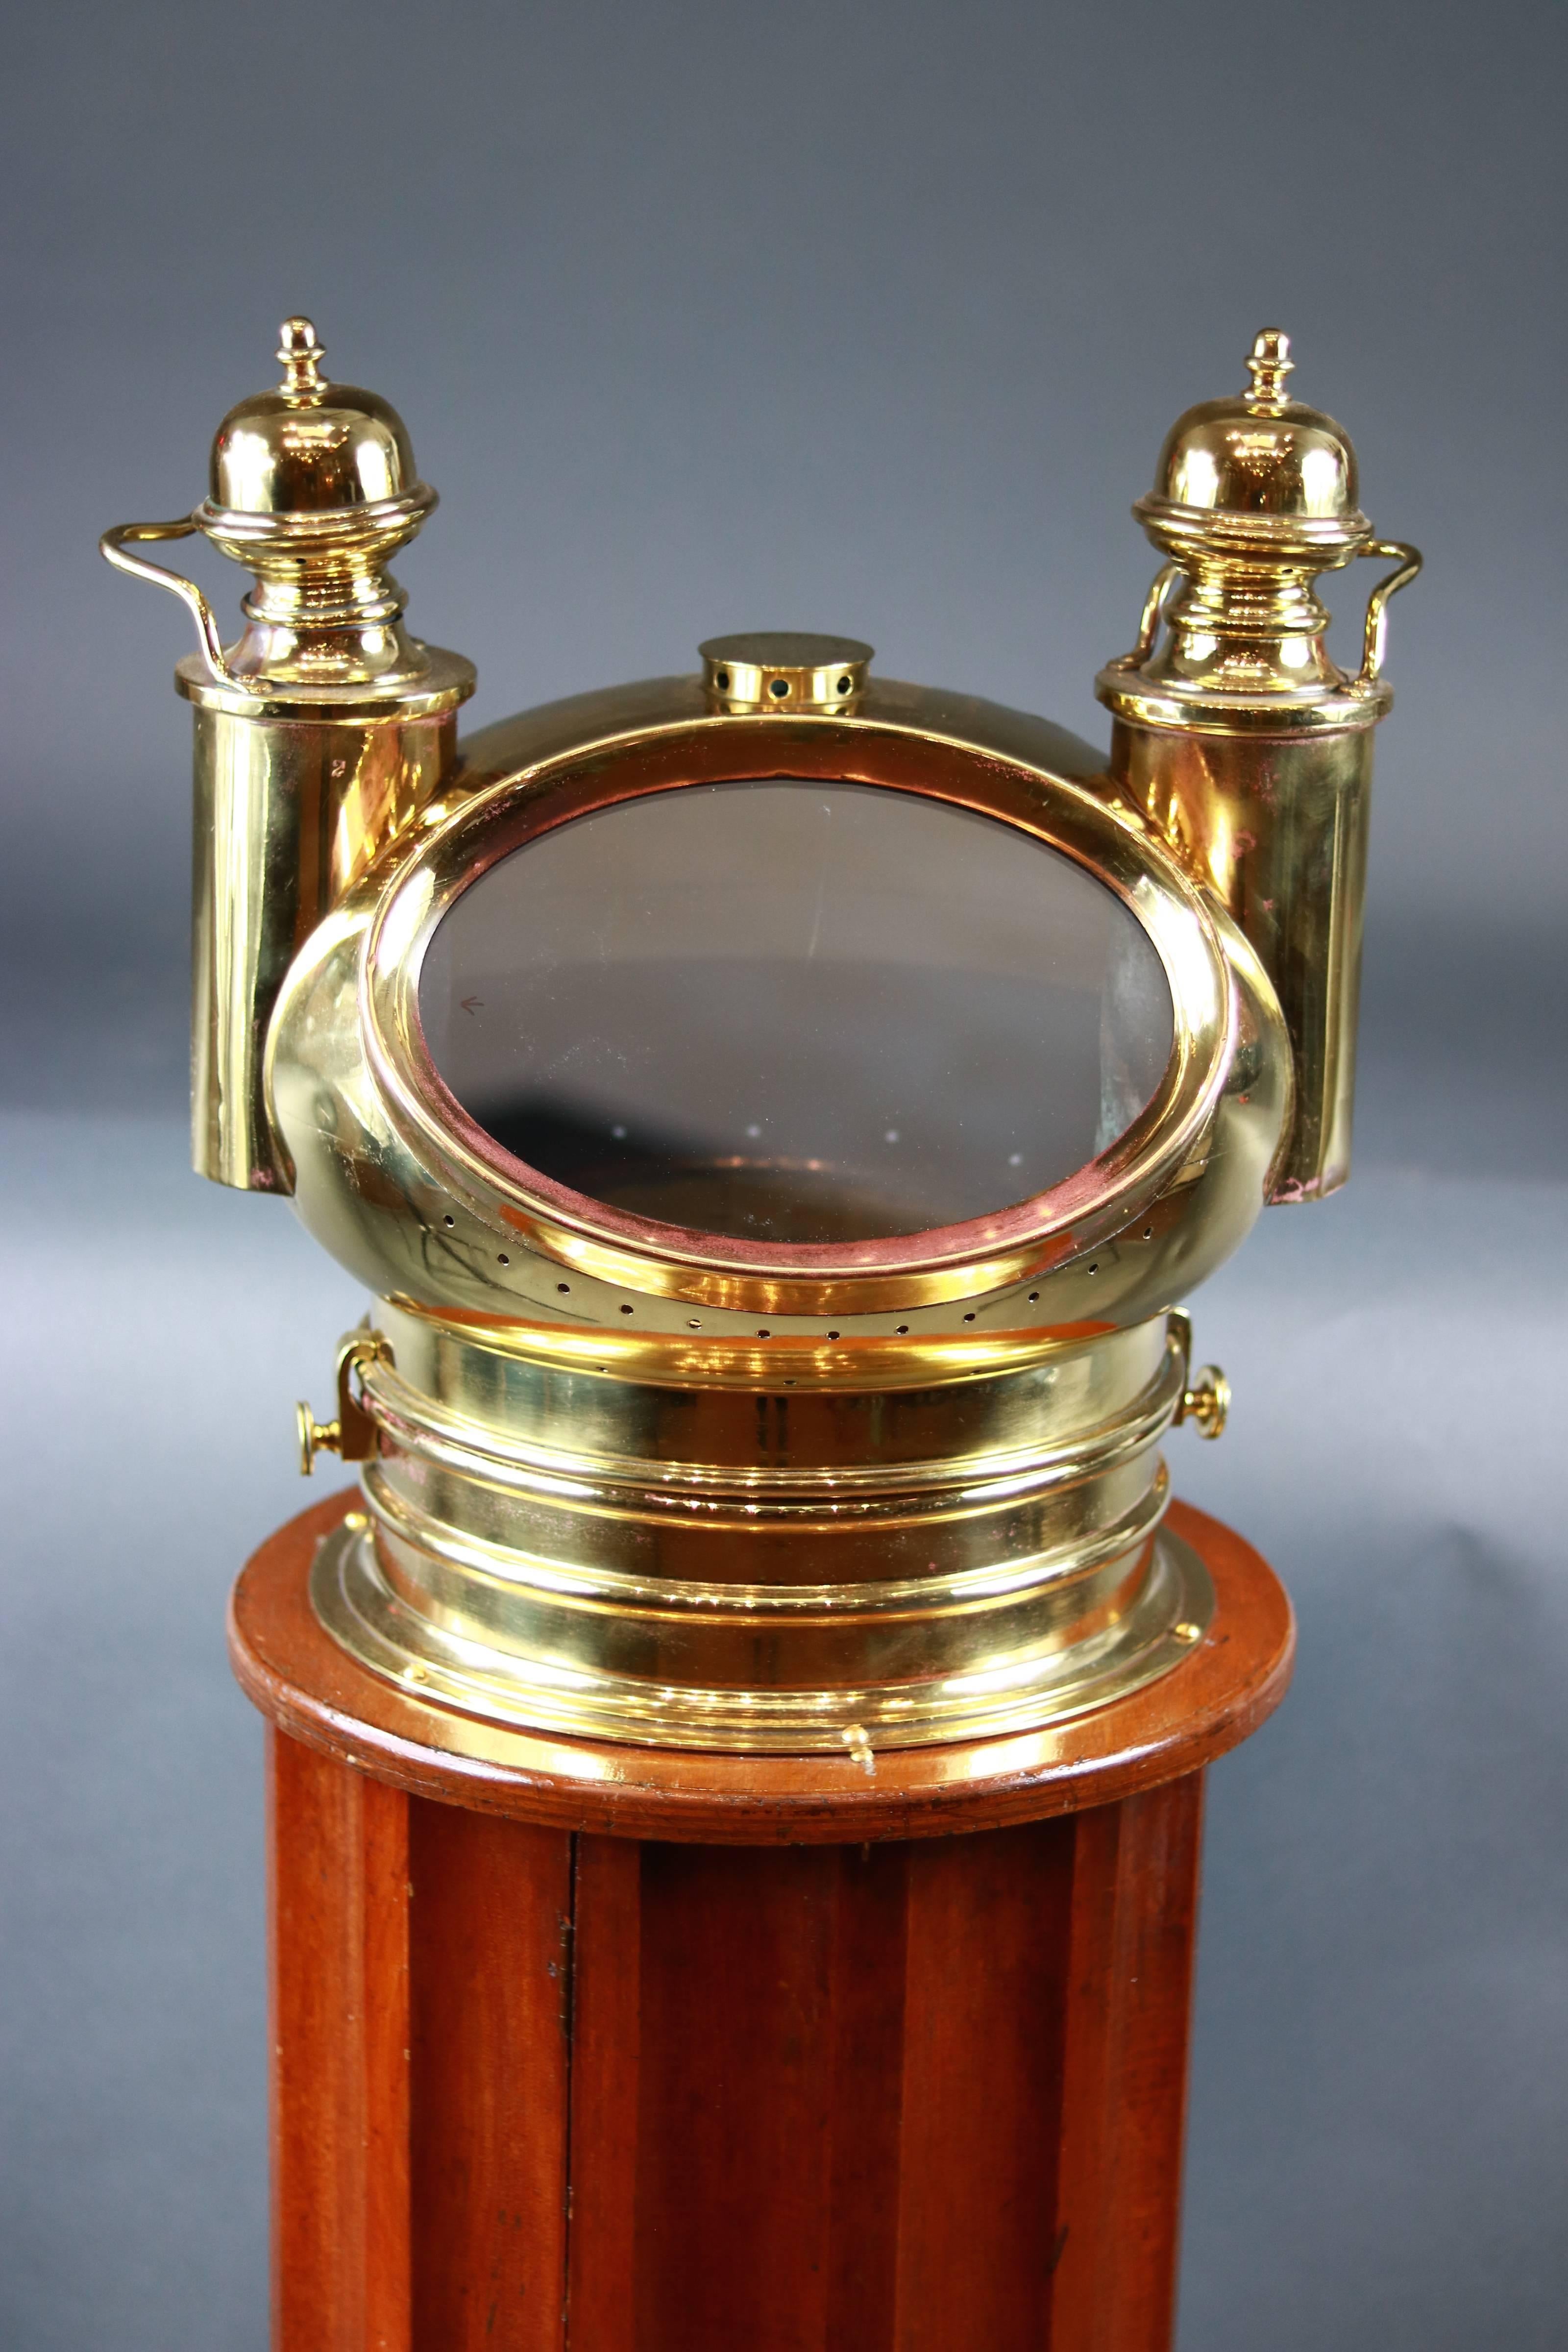 Late, 19th century ship's binnacle compass by Negus of New York. Turned, varnished mahogany Stand with brass hood stamped 